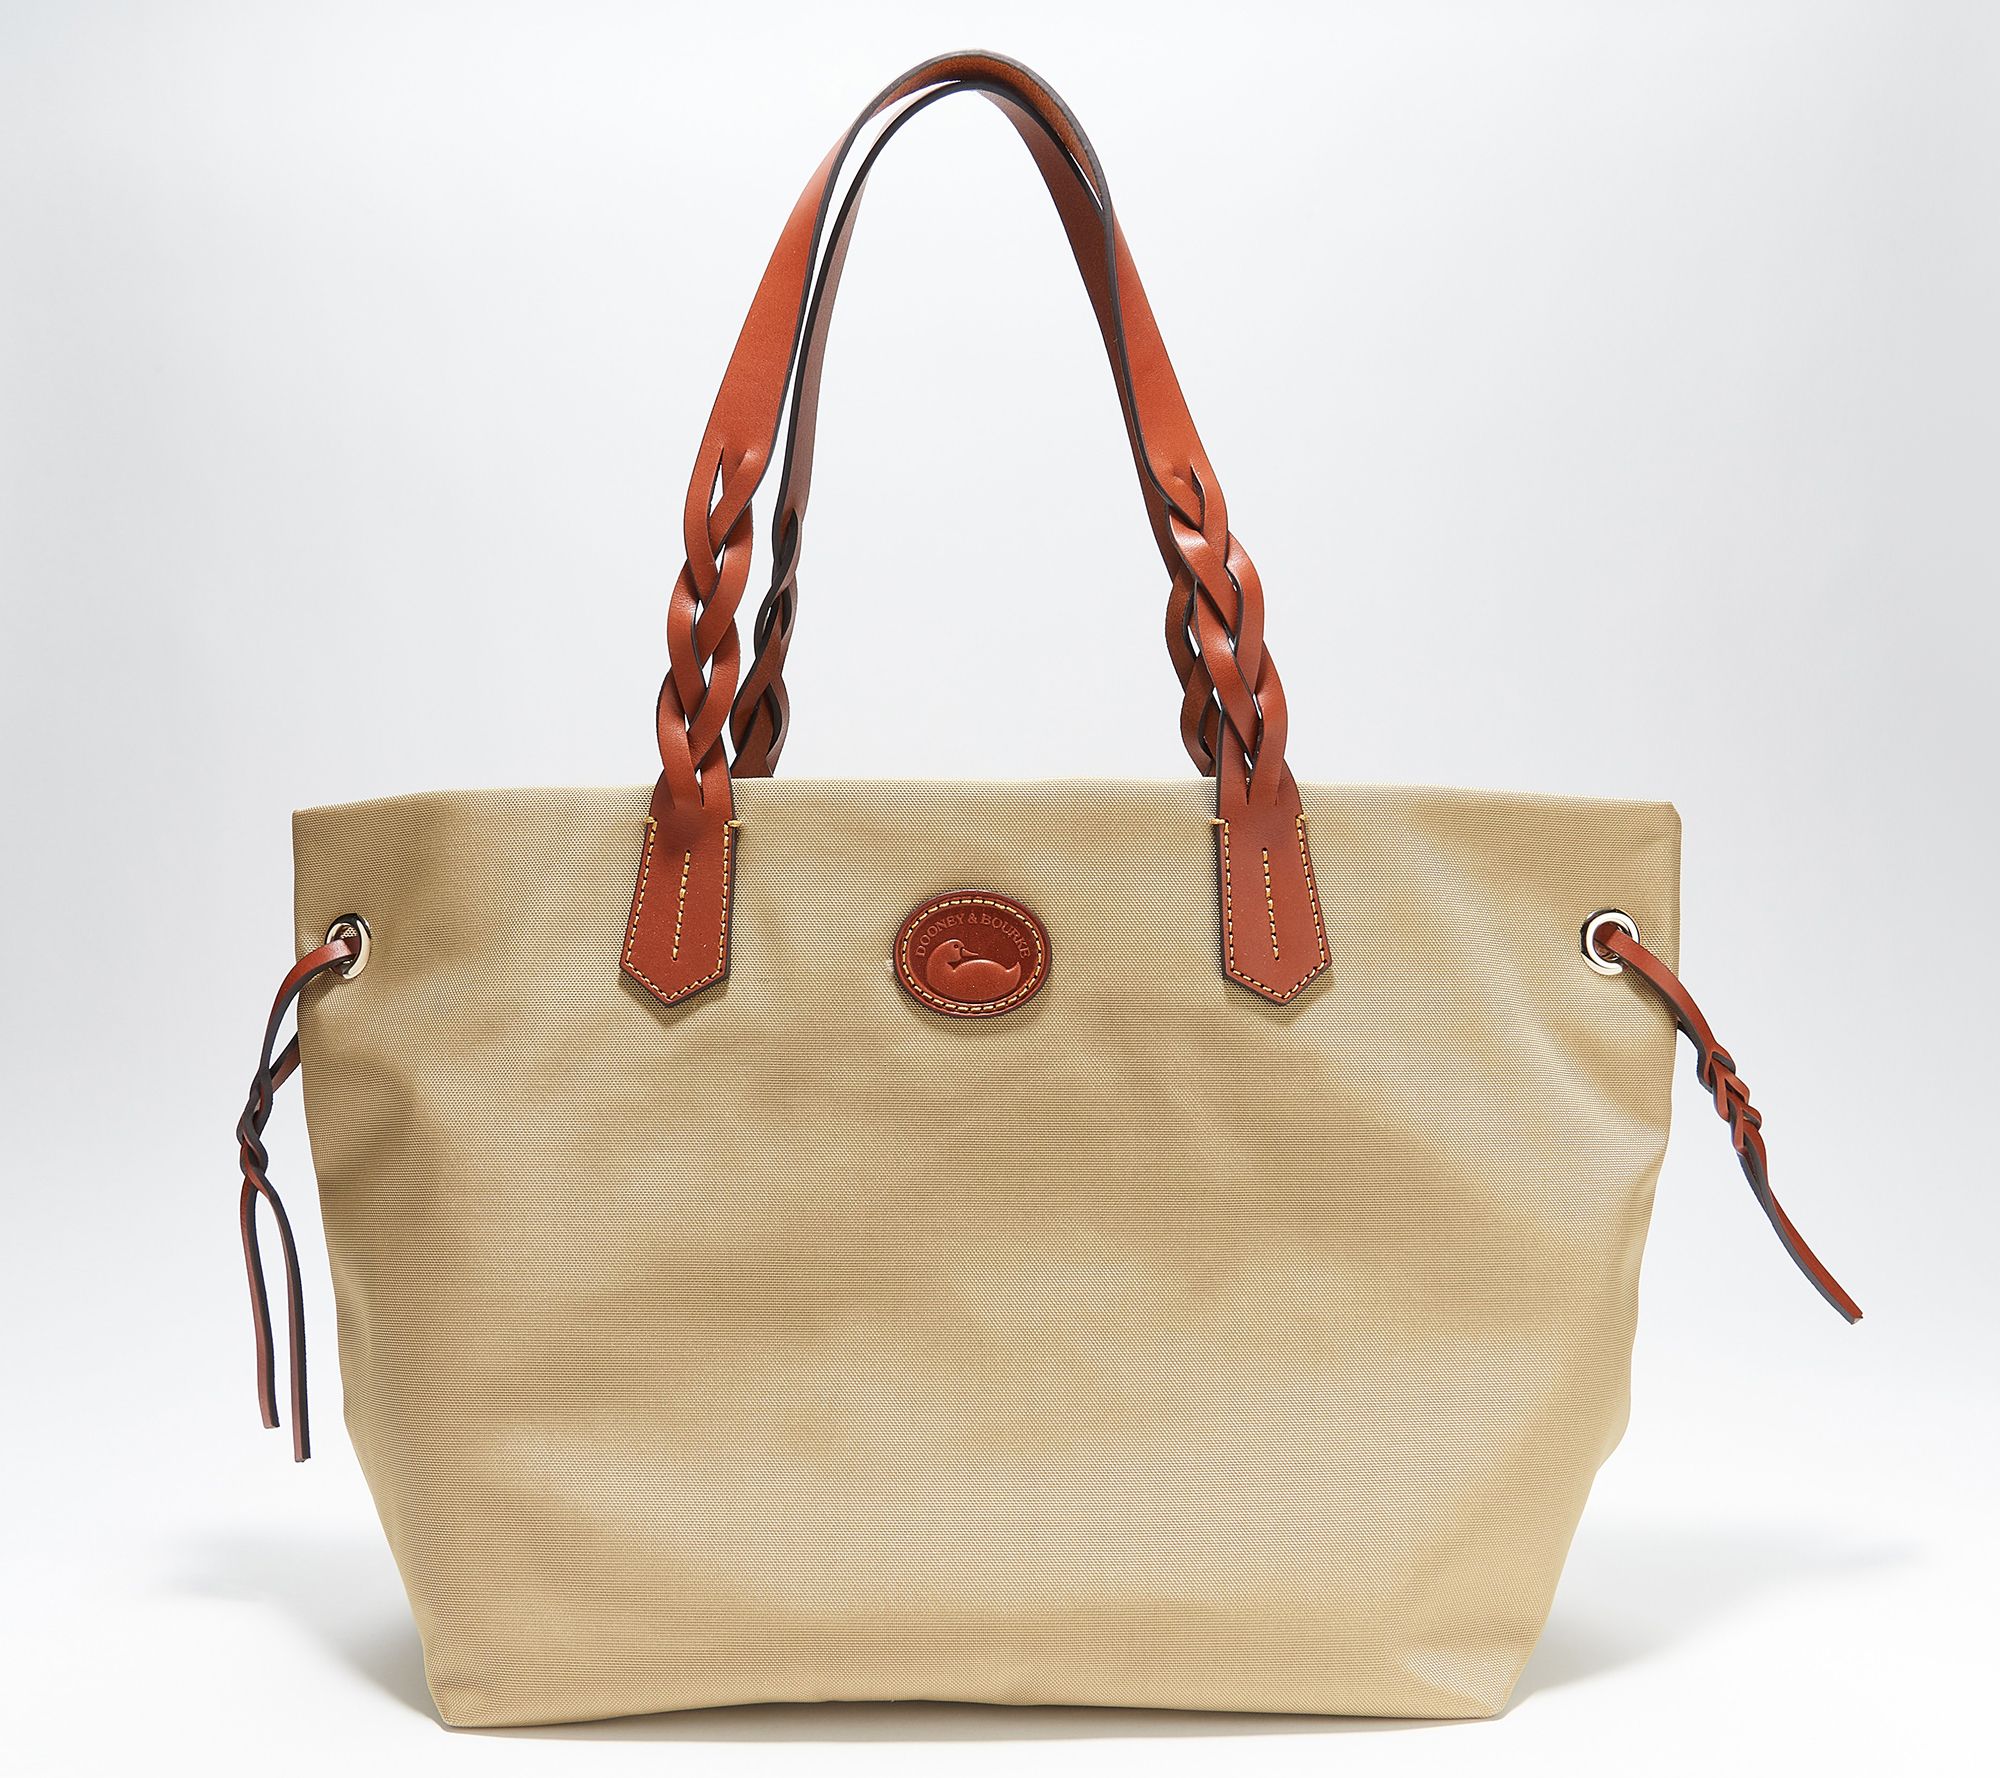 QVC Is Having a Sale on Dooney & Bourke Bags - PureWow